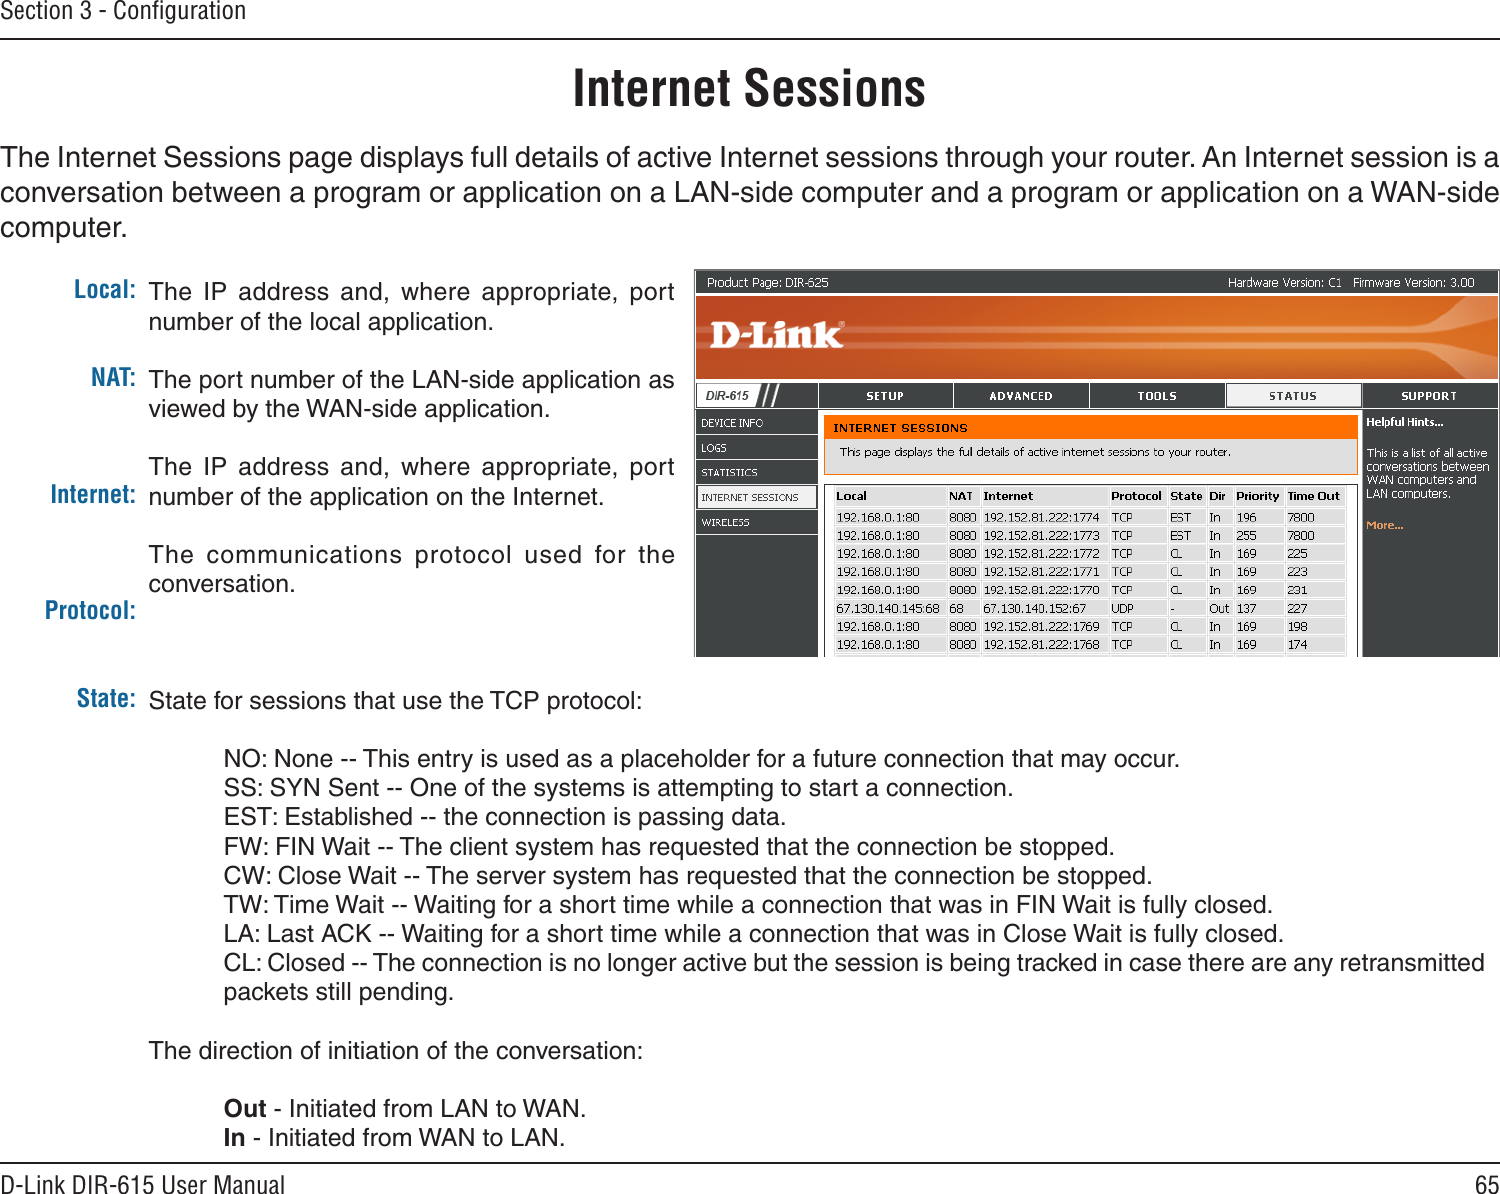 65D-Link DIR-615 User ManualSection 3 - ConﬁgurationInternet SessionsThe Internet Sessions page displays full details of active Internet sessions through your router. An Internet session is a conversation between a program or application on a LAN-side computer and a program or application on a WAN-side computer. Local:NAT:Internet:Protocol:State:The  IP  address  and,  where  appropriate,  port number of the local application. The port number of the LAN-side application as viewed by the WAN-side application. The  IP  address  and,  where  appropriate,  port number of the application on the Internet. The  communications  protocol  used  for  the conversation. State for sessions that use the TCP protocol:  NO: None -- This entry is used as a placeholder for a future connection that may occur.  SS: SYN Sent -- One of the systems is attempting to start a connection.  EST: Established -- the connection is passing data.  FW: FIN Wait -- The client system has requested that the connection be stopped.  CW: Close Wait -- The server system has requested that the connection be stopped.  TW: Time Wait -- Waiting for a short time while a connection that was in FIN Wait is fully closed.  LA: Last ACK -- Waiting for a short time while a connection that was in Close Wait is fully closed. CL: Closed -- The connection is no longer active but the session is being tracked in case there are any retransmitted packets still pending.The direction of initiation of the conversation:   Out - Initiated from LAN to WAN.  In - Initiated from WAN to LAN.